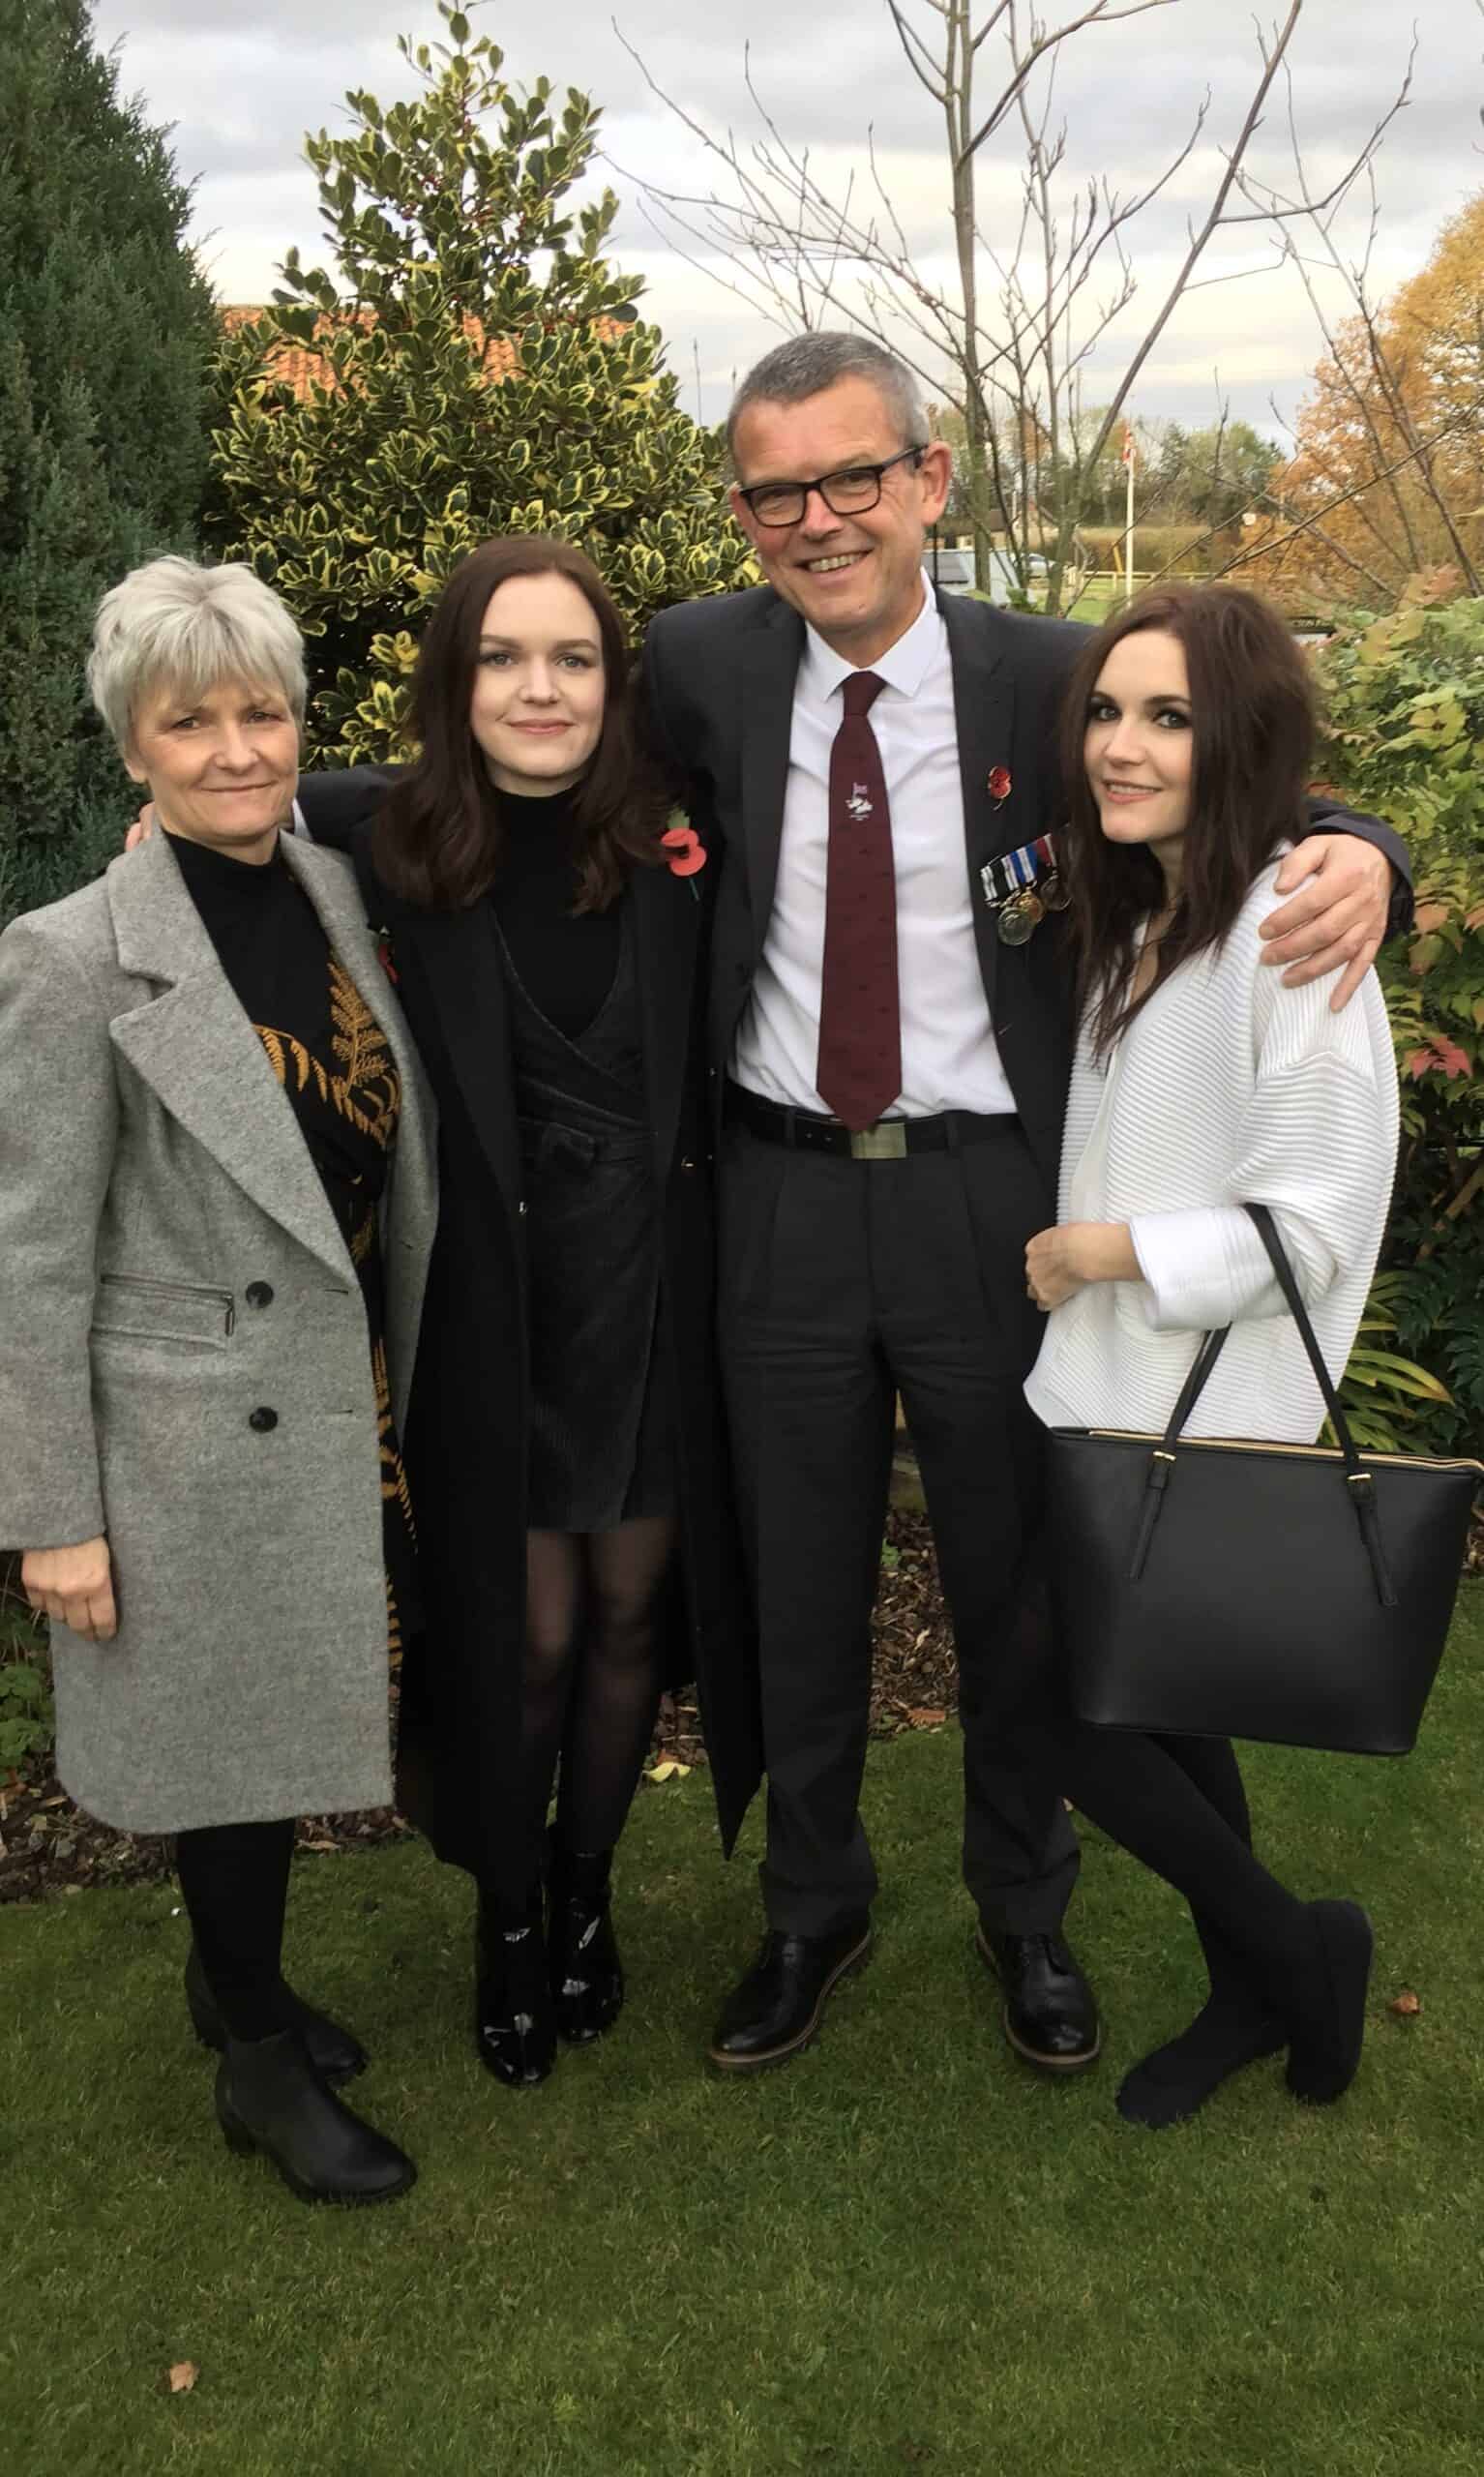 Gary, centre in darl suit with white short and red tie, with his wife and daughters stood at each side